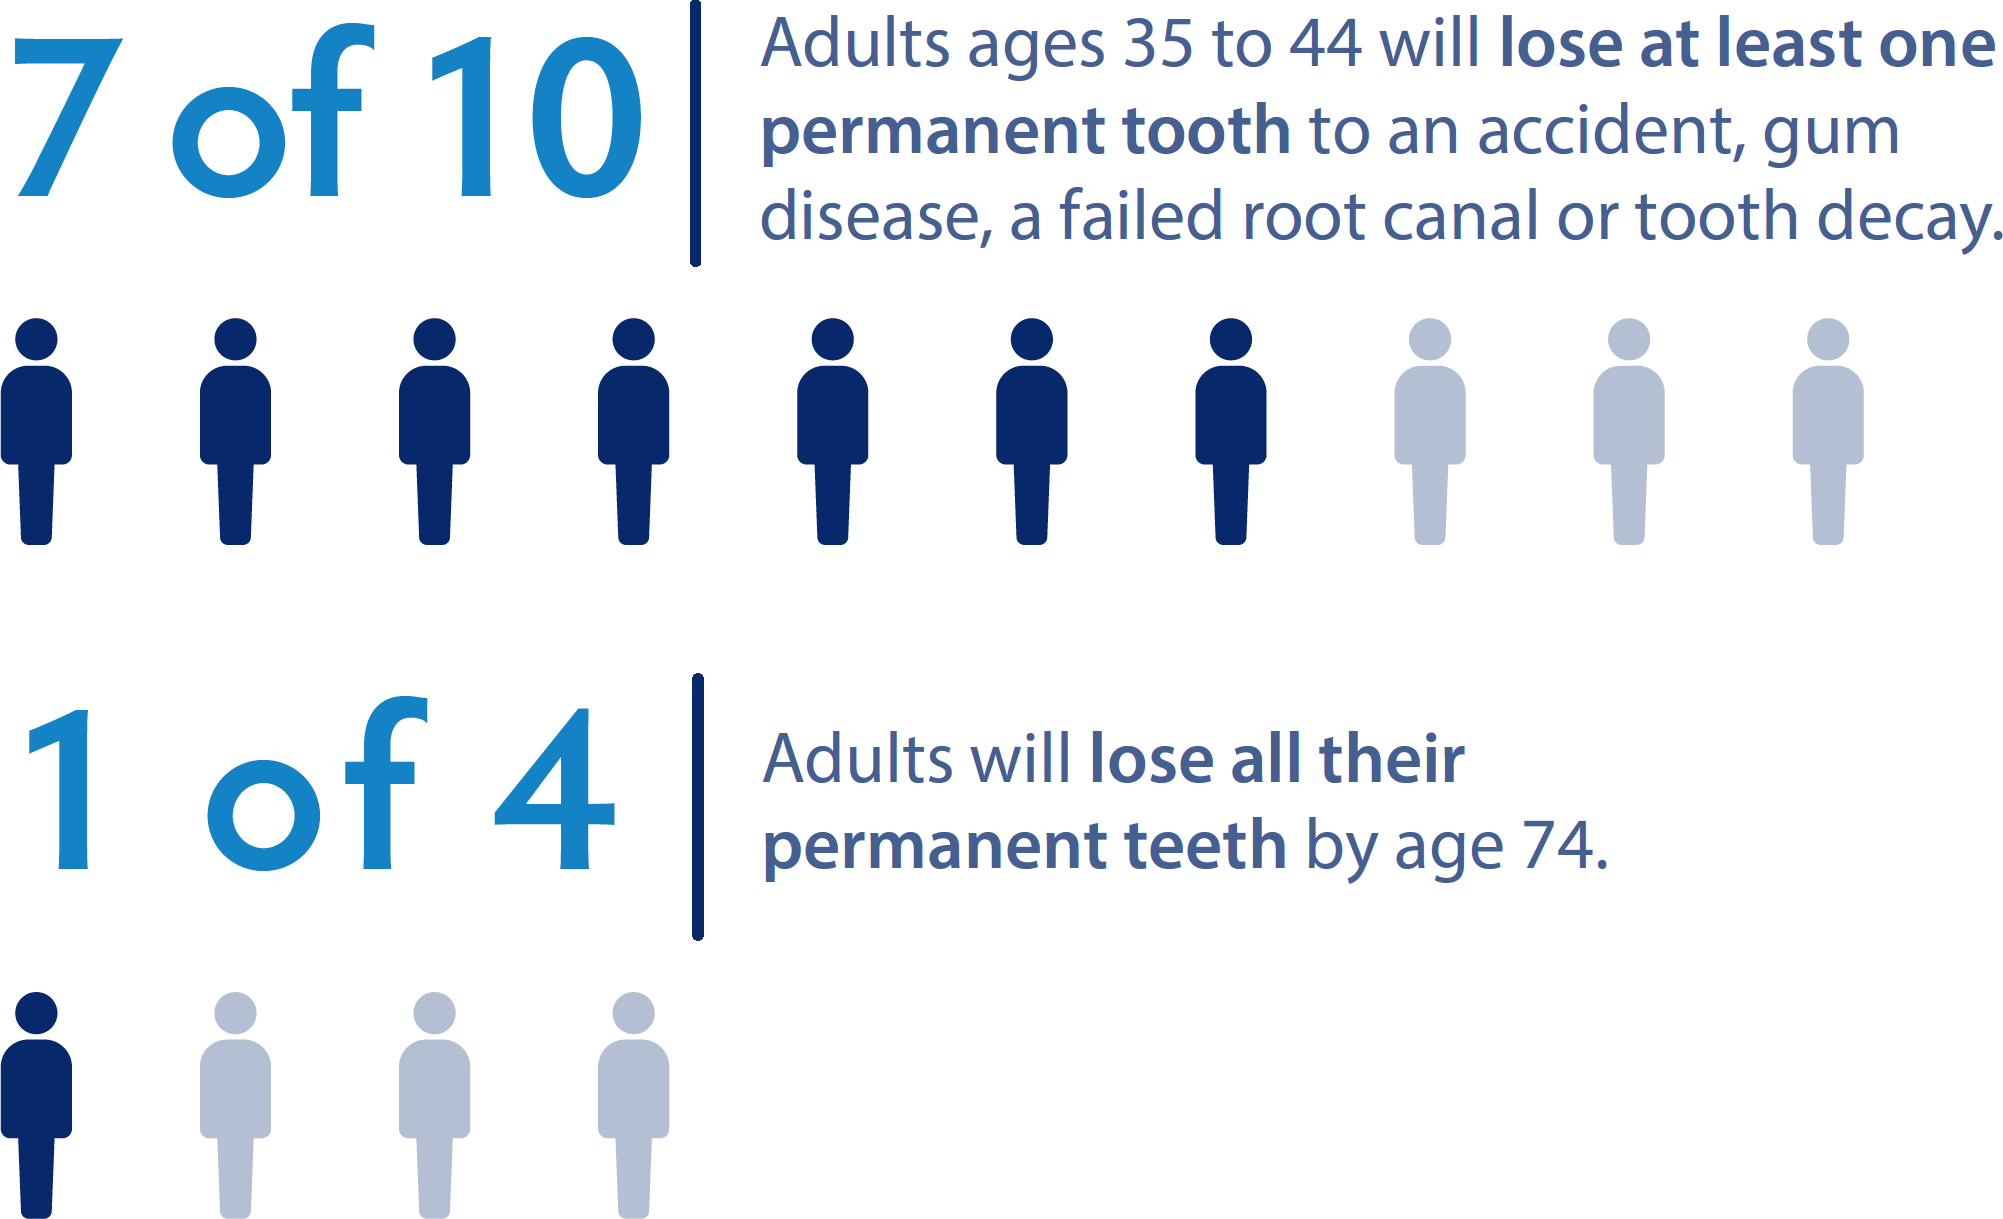 Dental implants are common